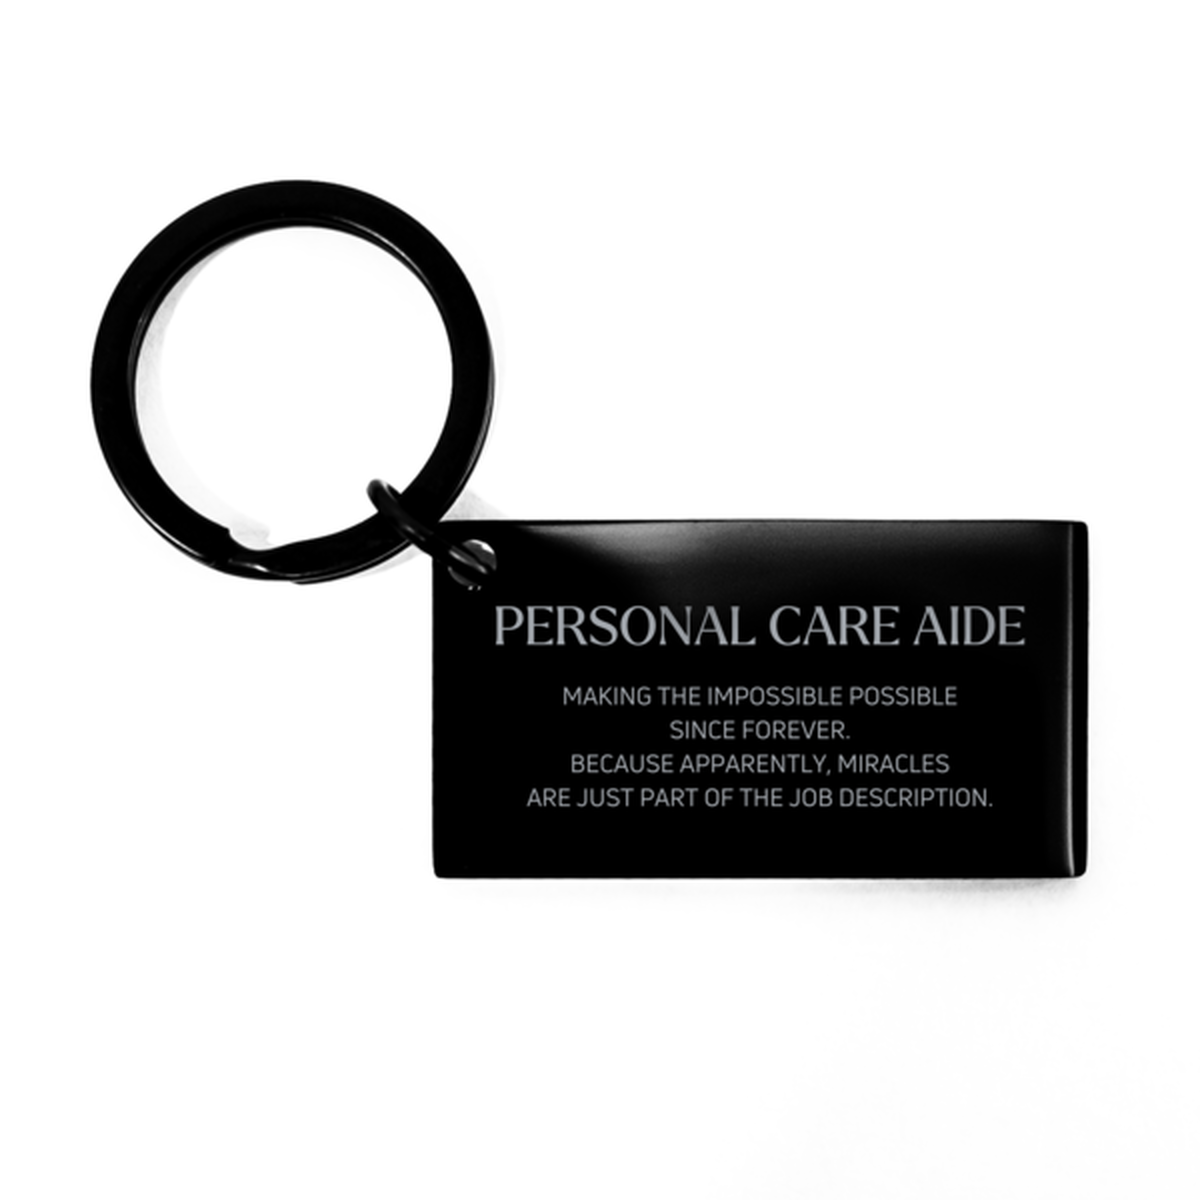 Funny Personal Care Aide Gifts, Miracles are just part of the job description, Inspirational Birthday Keychain For Personal Care Aide, Men, Women, Coworkers, Friends, Boss